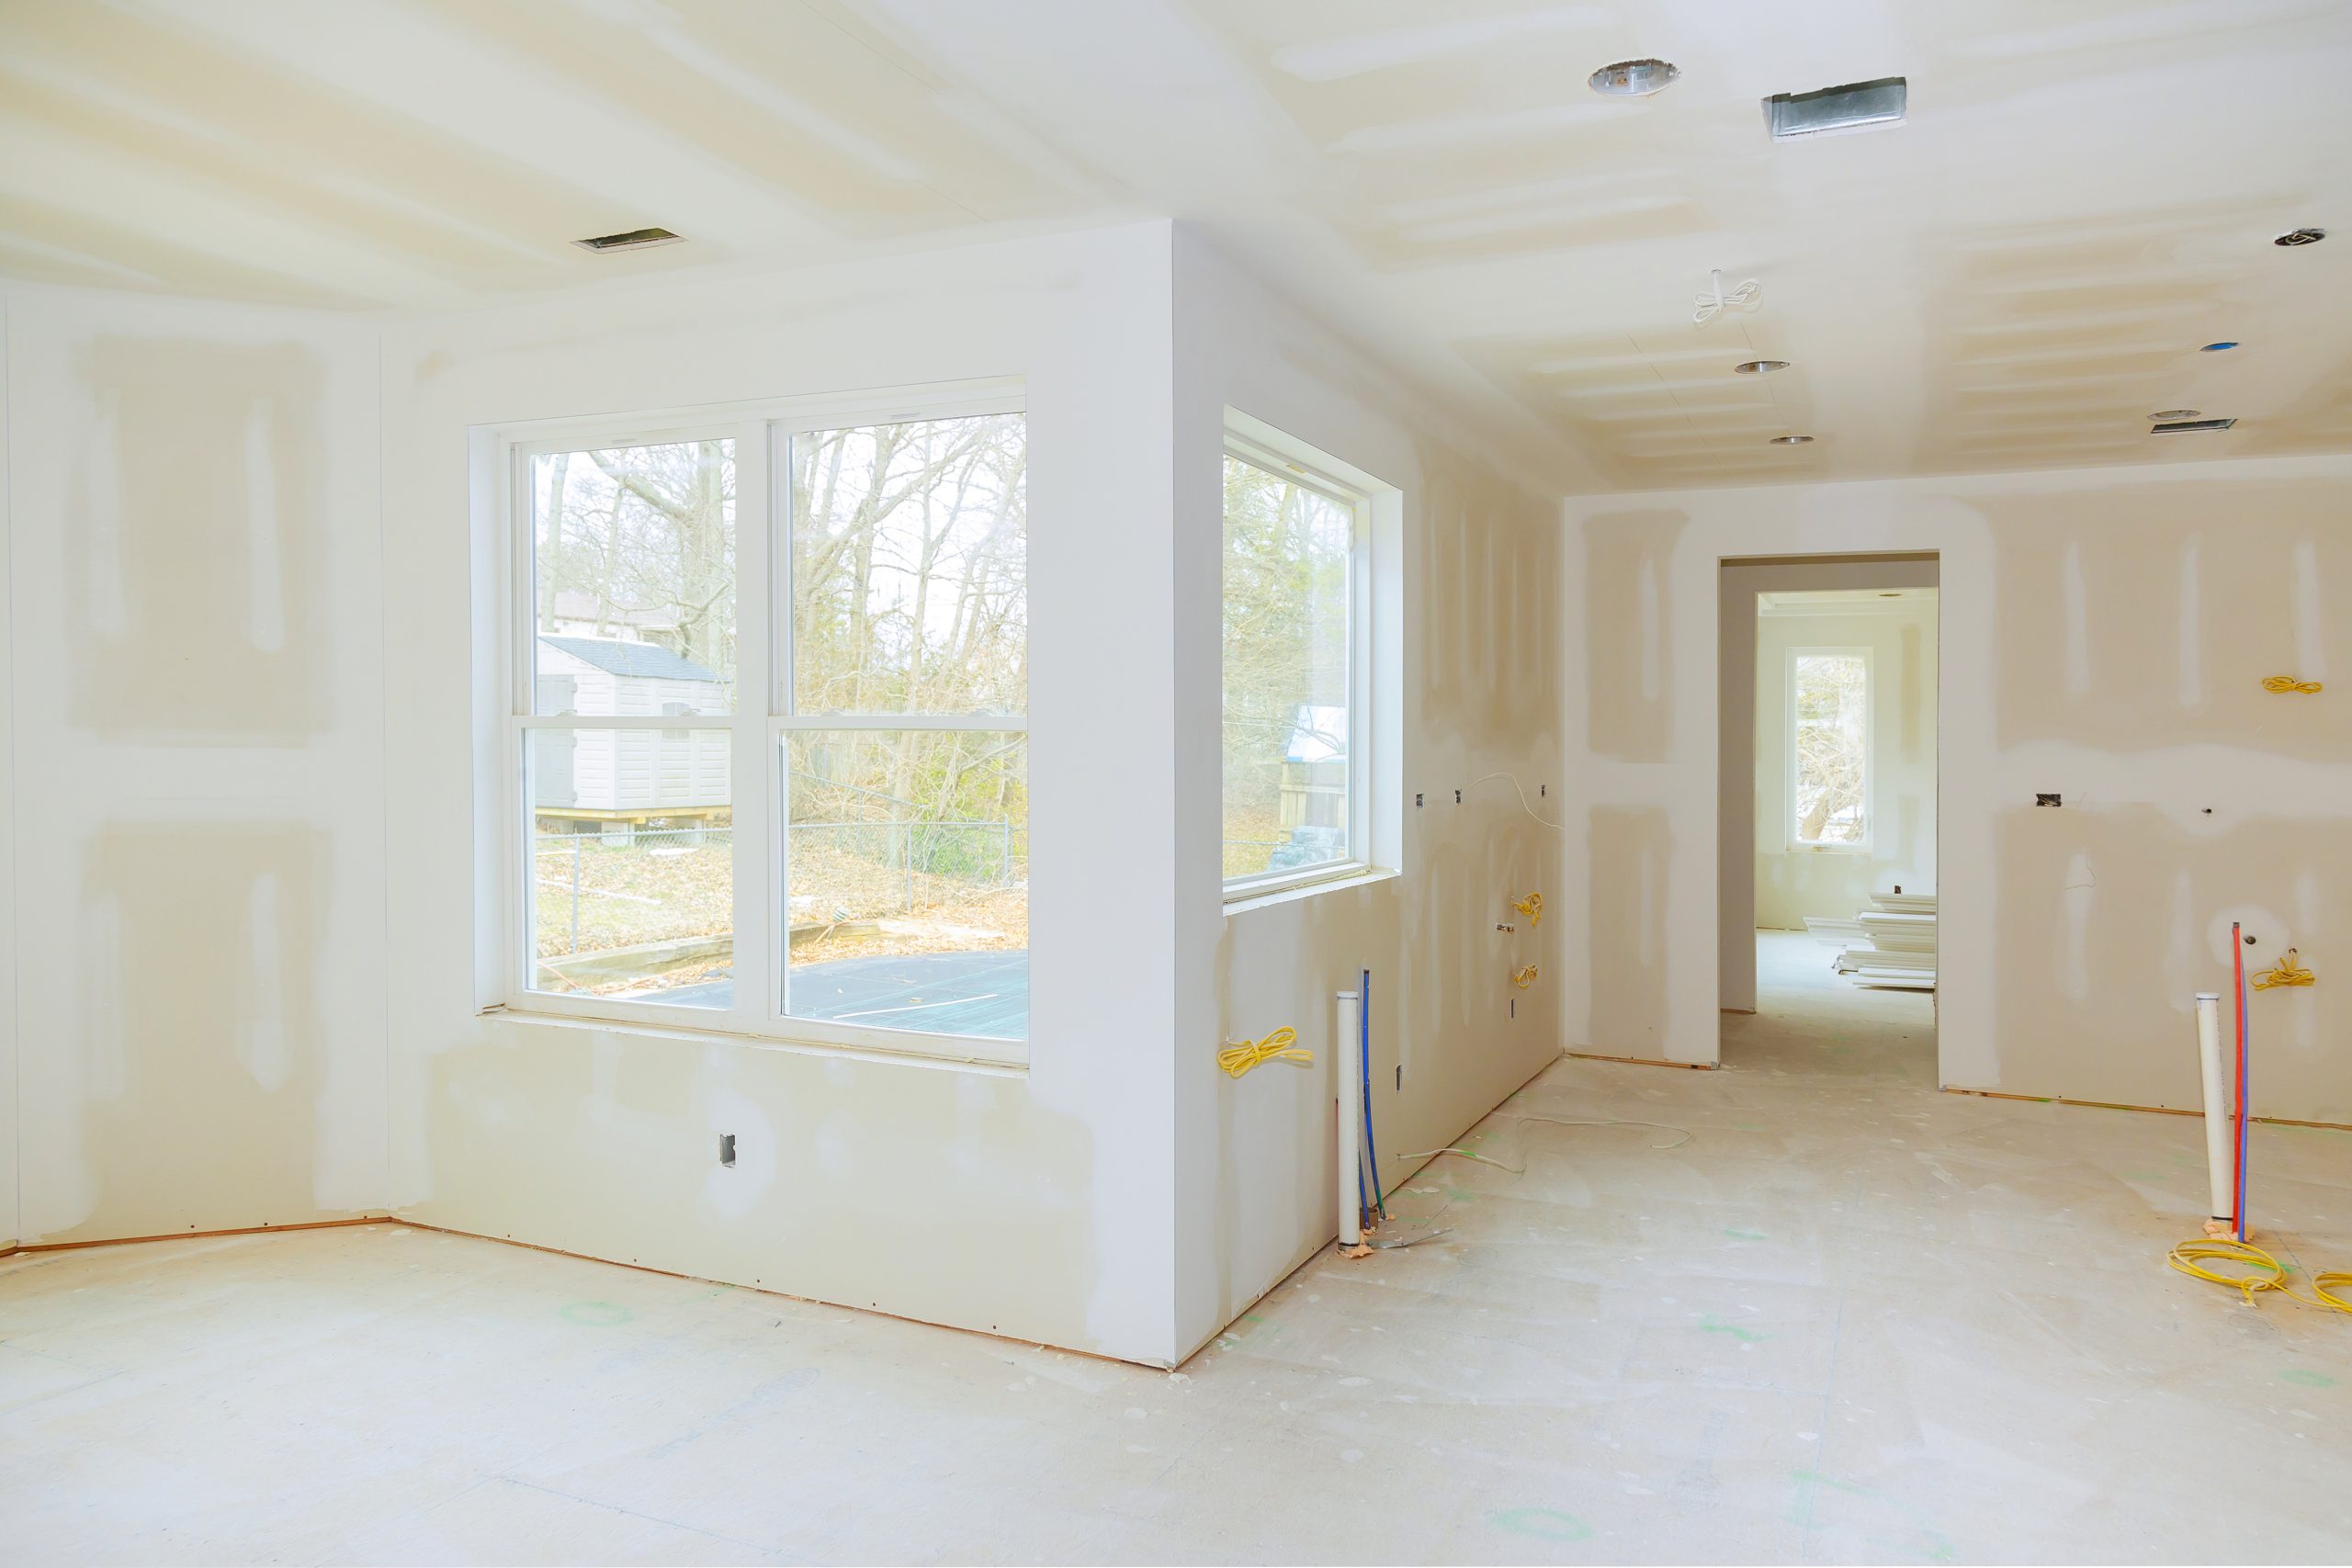 Interior,Construction,Of,Housing,Project,With,Drywall,Installed,And,Patched